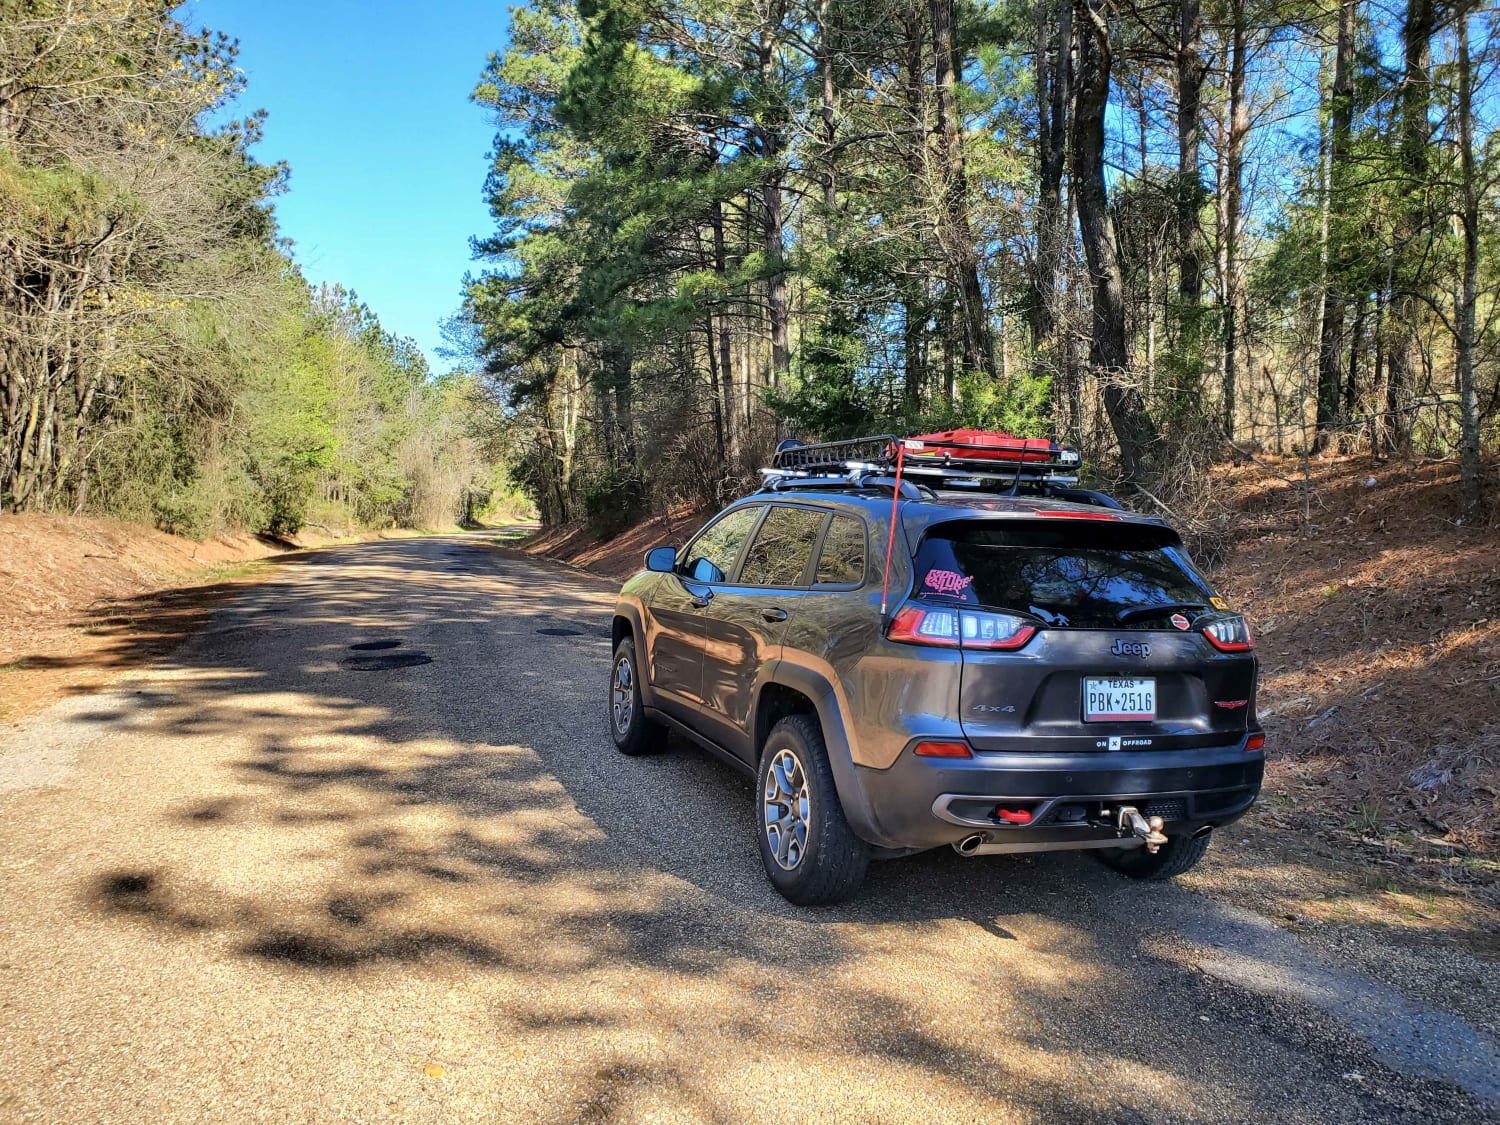 The Arkansas Overland Route - Section 1 - Falcon Bottoms Back Roads